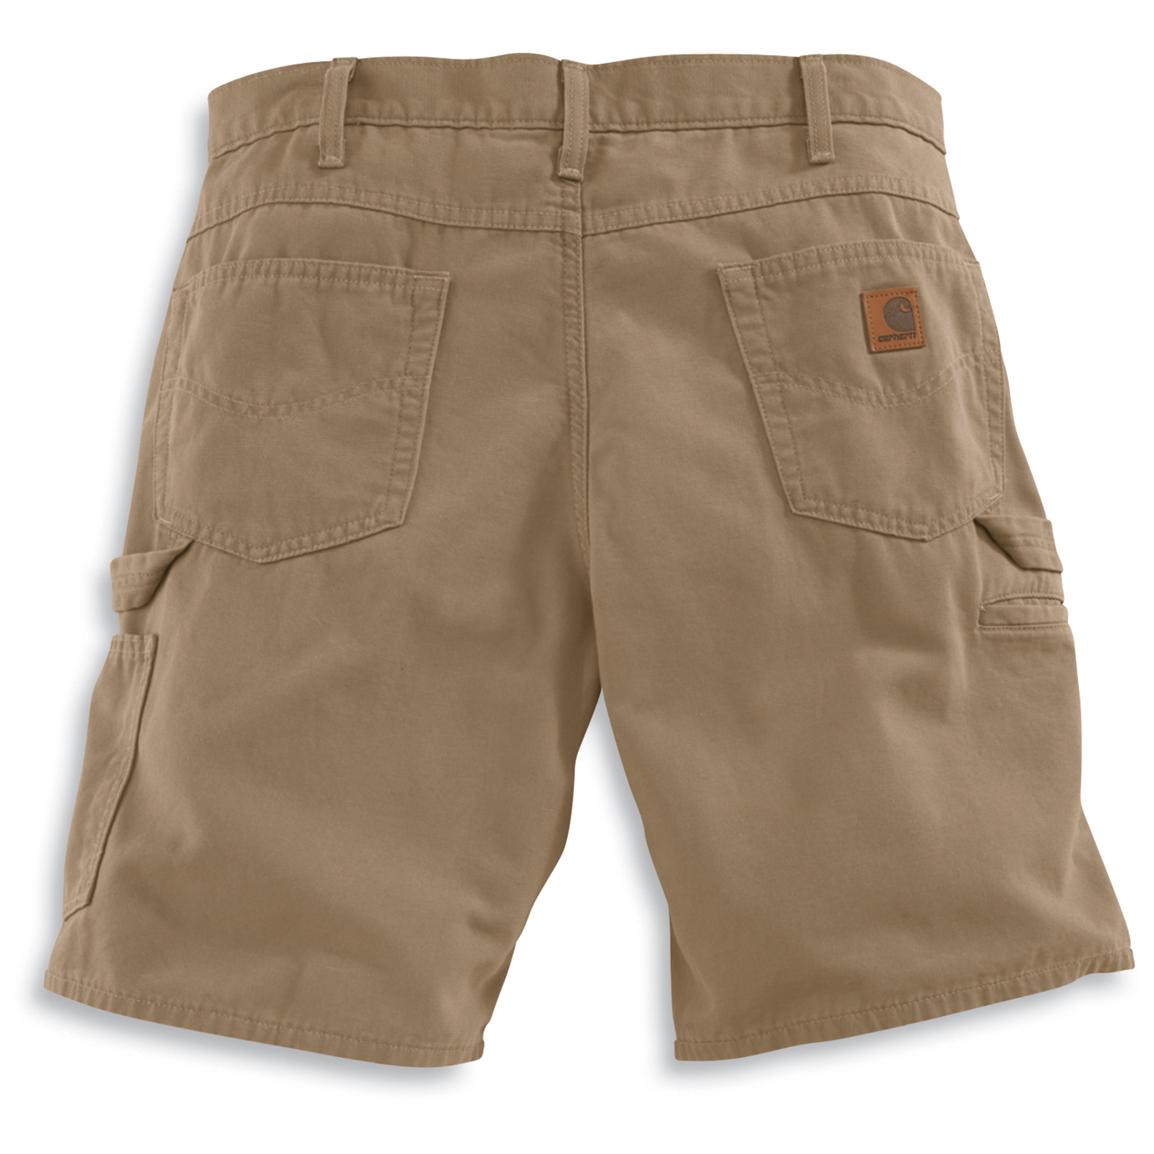 Men's Carhartt® Canvas Utility Shorts - 200477, Shorts at Sportsman's Guide